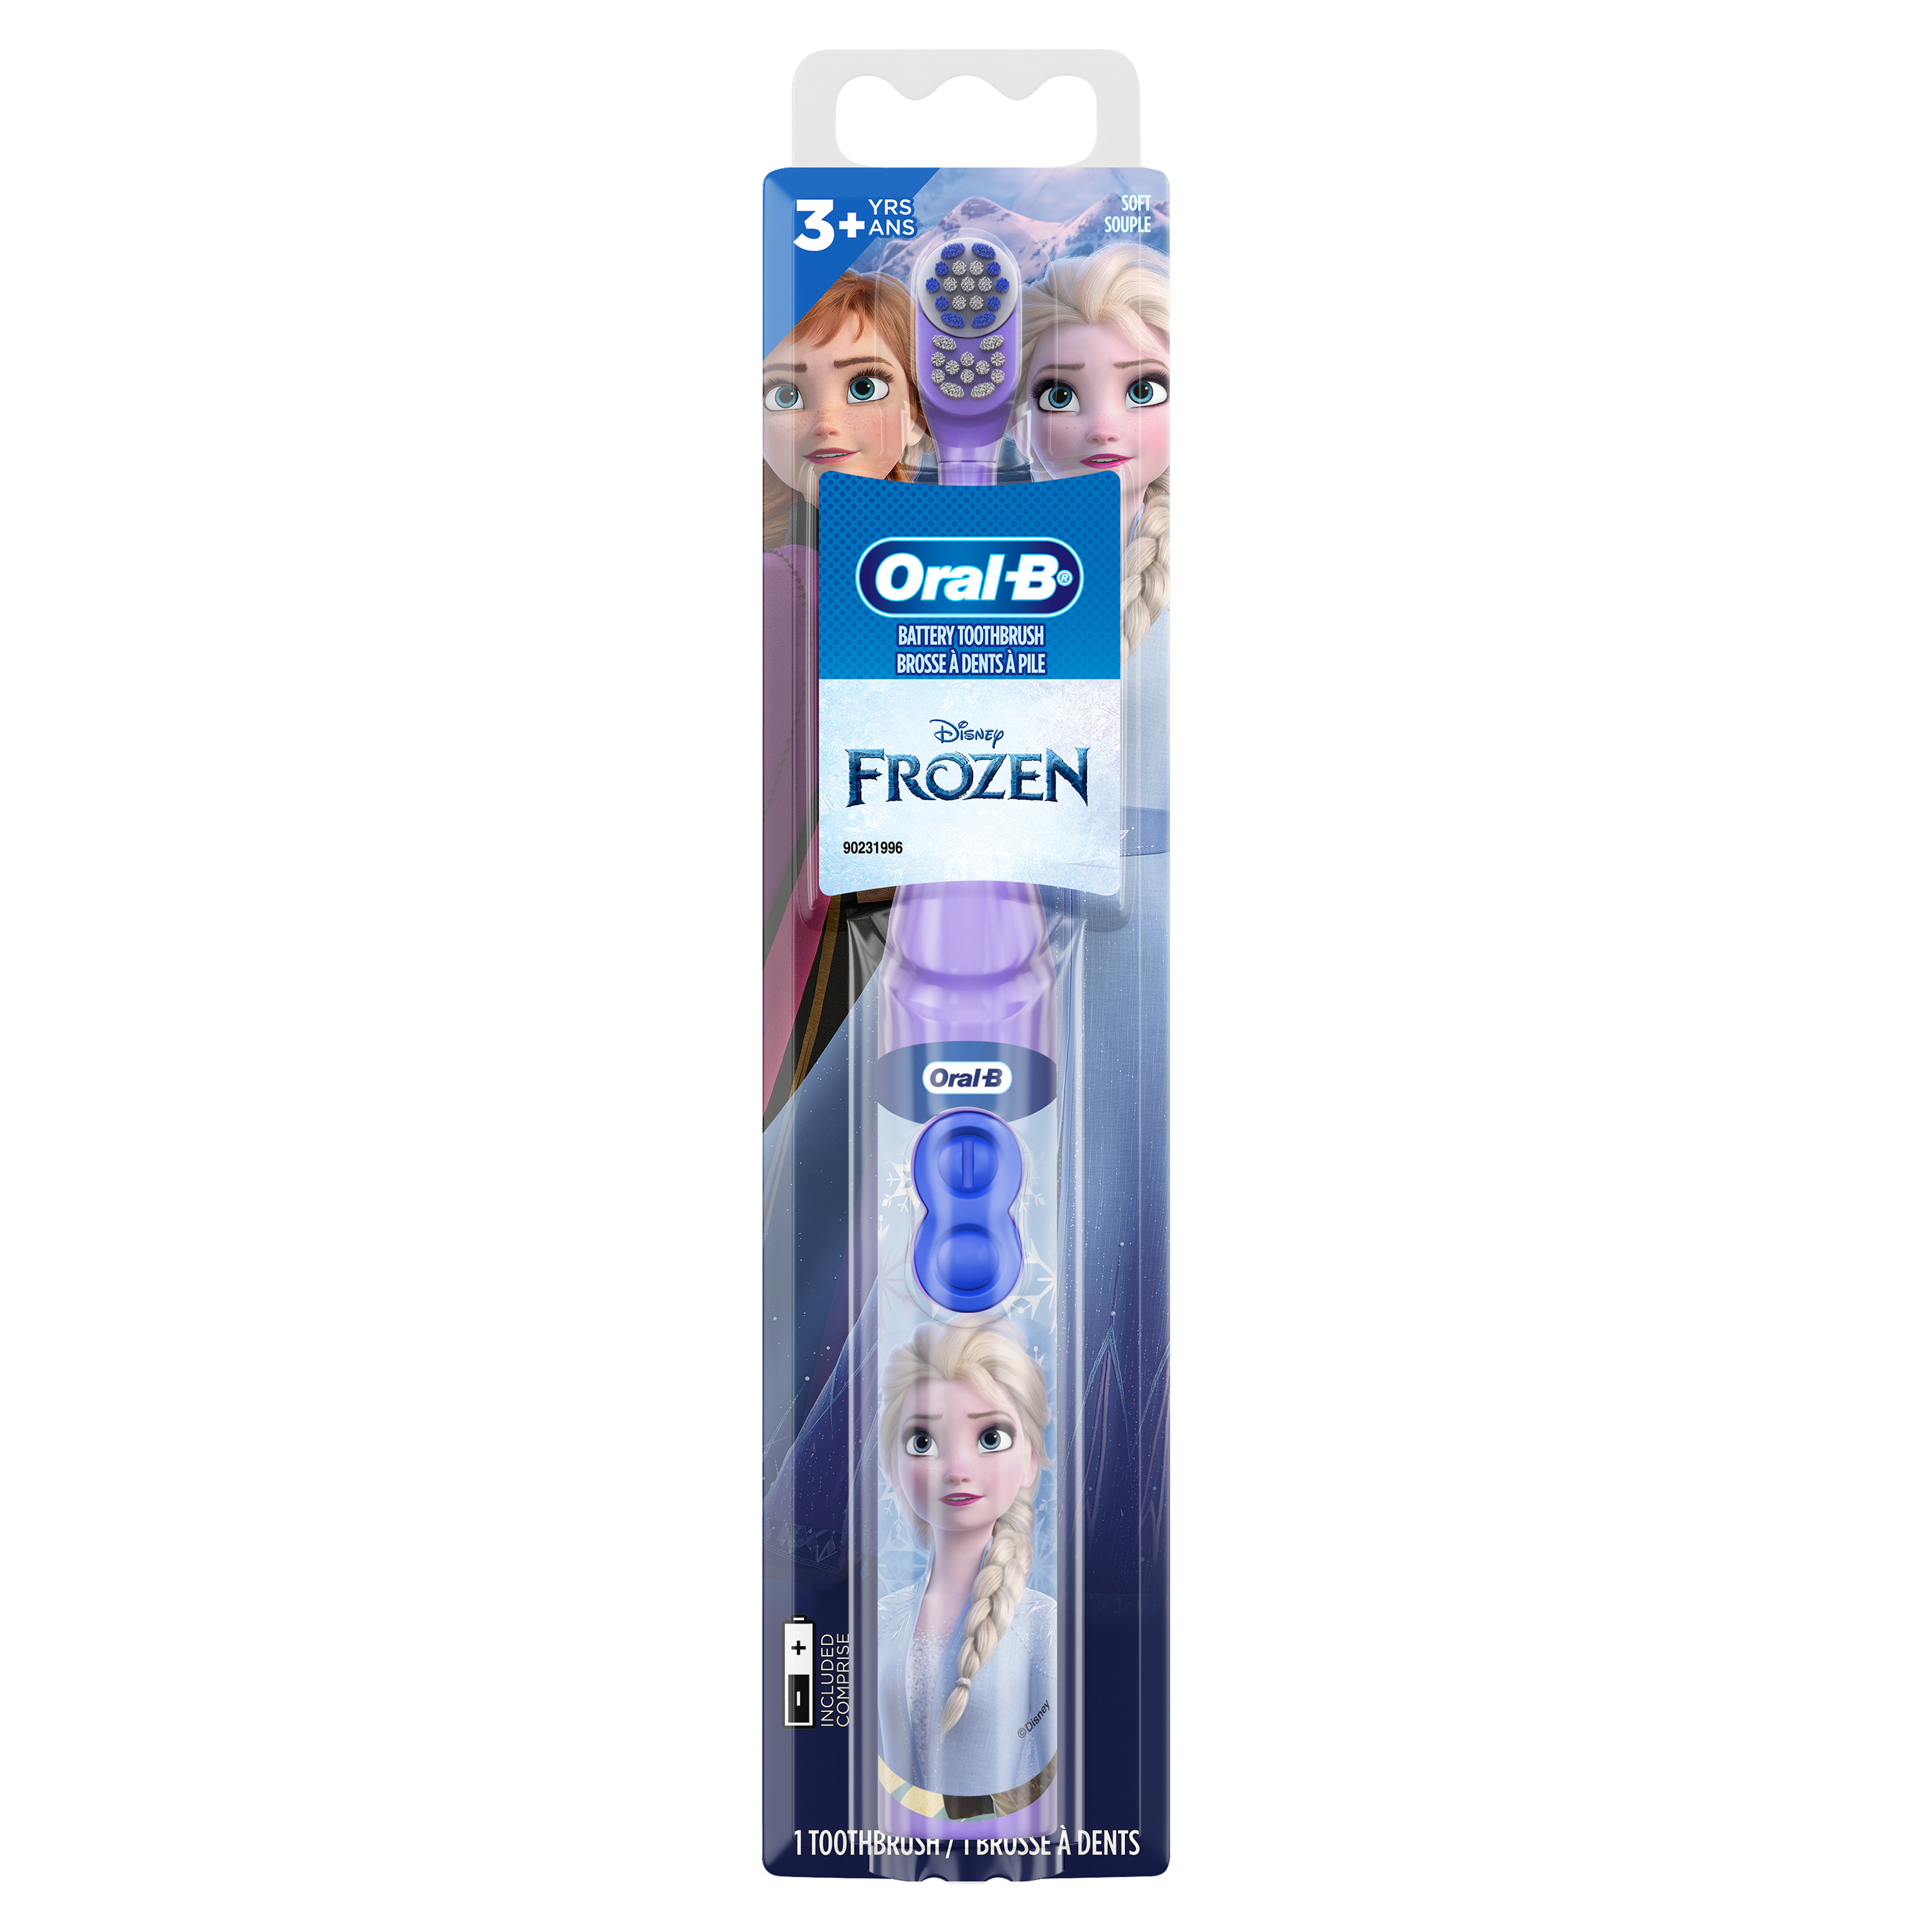 Oral-B Pro-Health Jr. Battery Kid's Full Head Electric Toothbrush, Soft, for Children 3+ - image 1 of 10